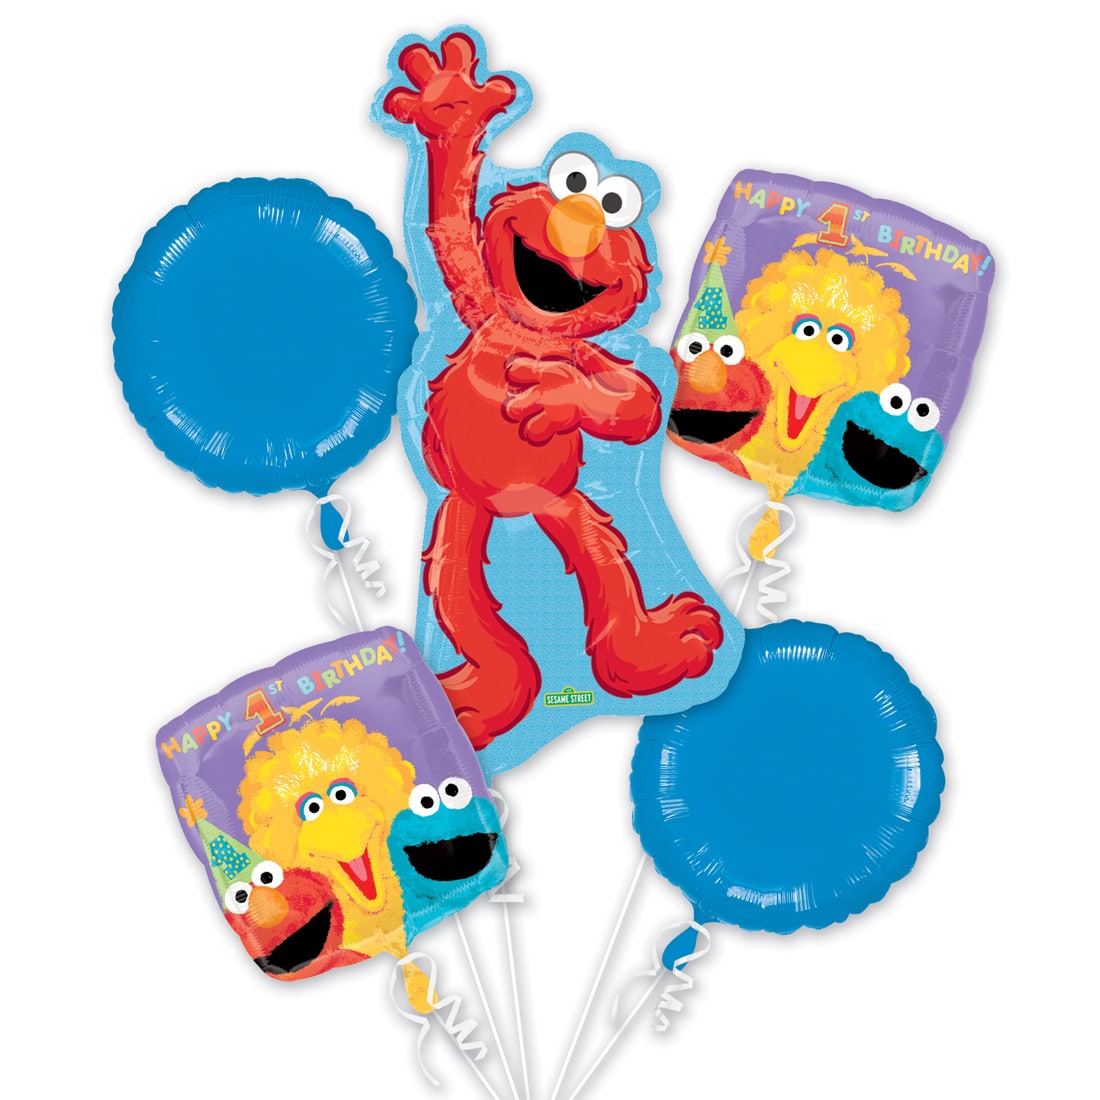 Download Paper Party Kids Elmo 1st Birthday Balloon Bouquet Sesame Street 1st Birthday Party Balloons Elmo Balloons 1st Birthday Boy Girl Craft Supplies Tools